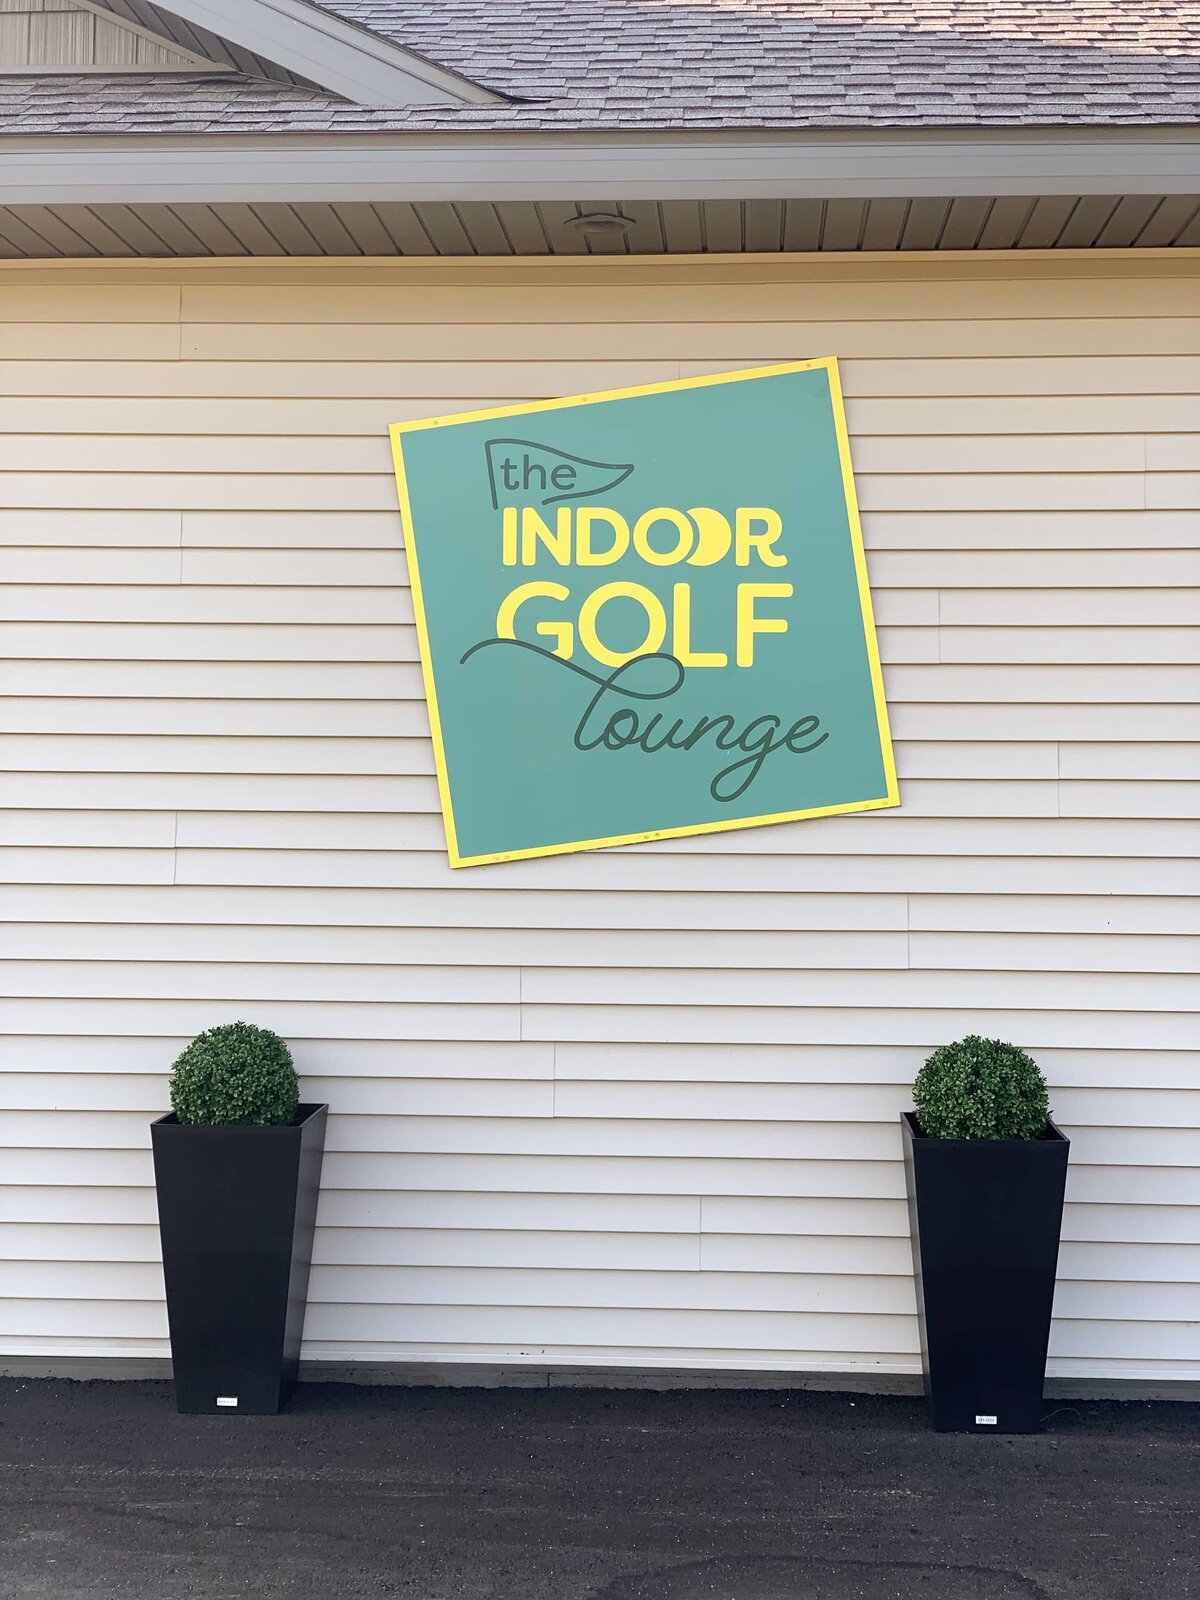 A large sign printed with The Indoor Golf Lounge logo is mounted on an exterior wall between two planters